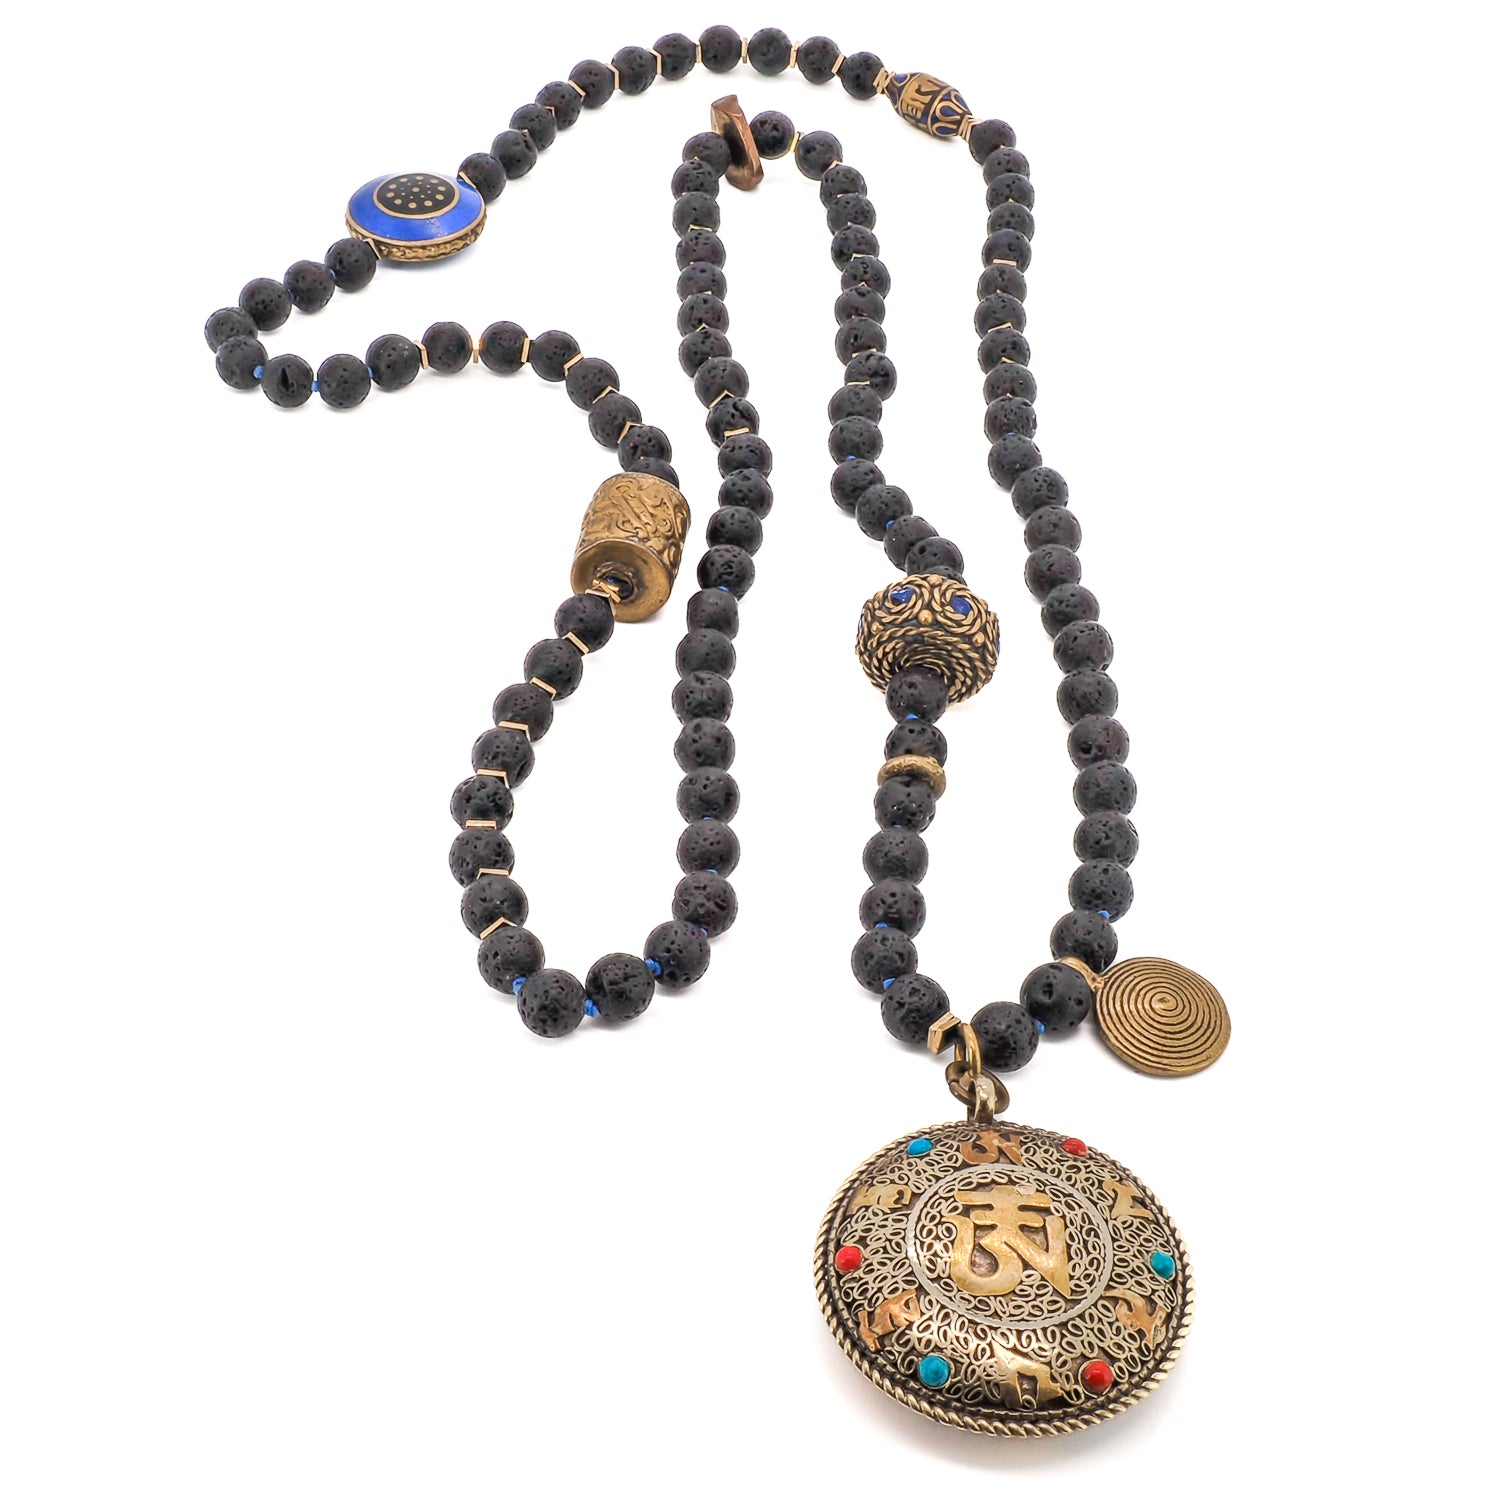 This &quot;Black Nepal Om Mala Mantra Necklace&quot; features a stunning brass handmade Nepal spiral charm and a large brass handmade Nepalese bead with lapis lazuli inlay.